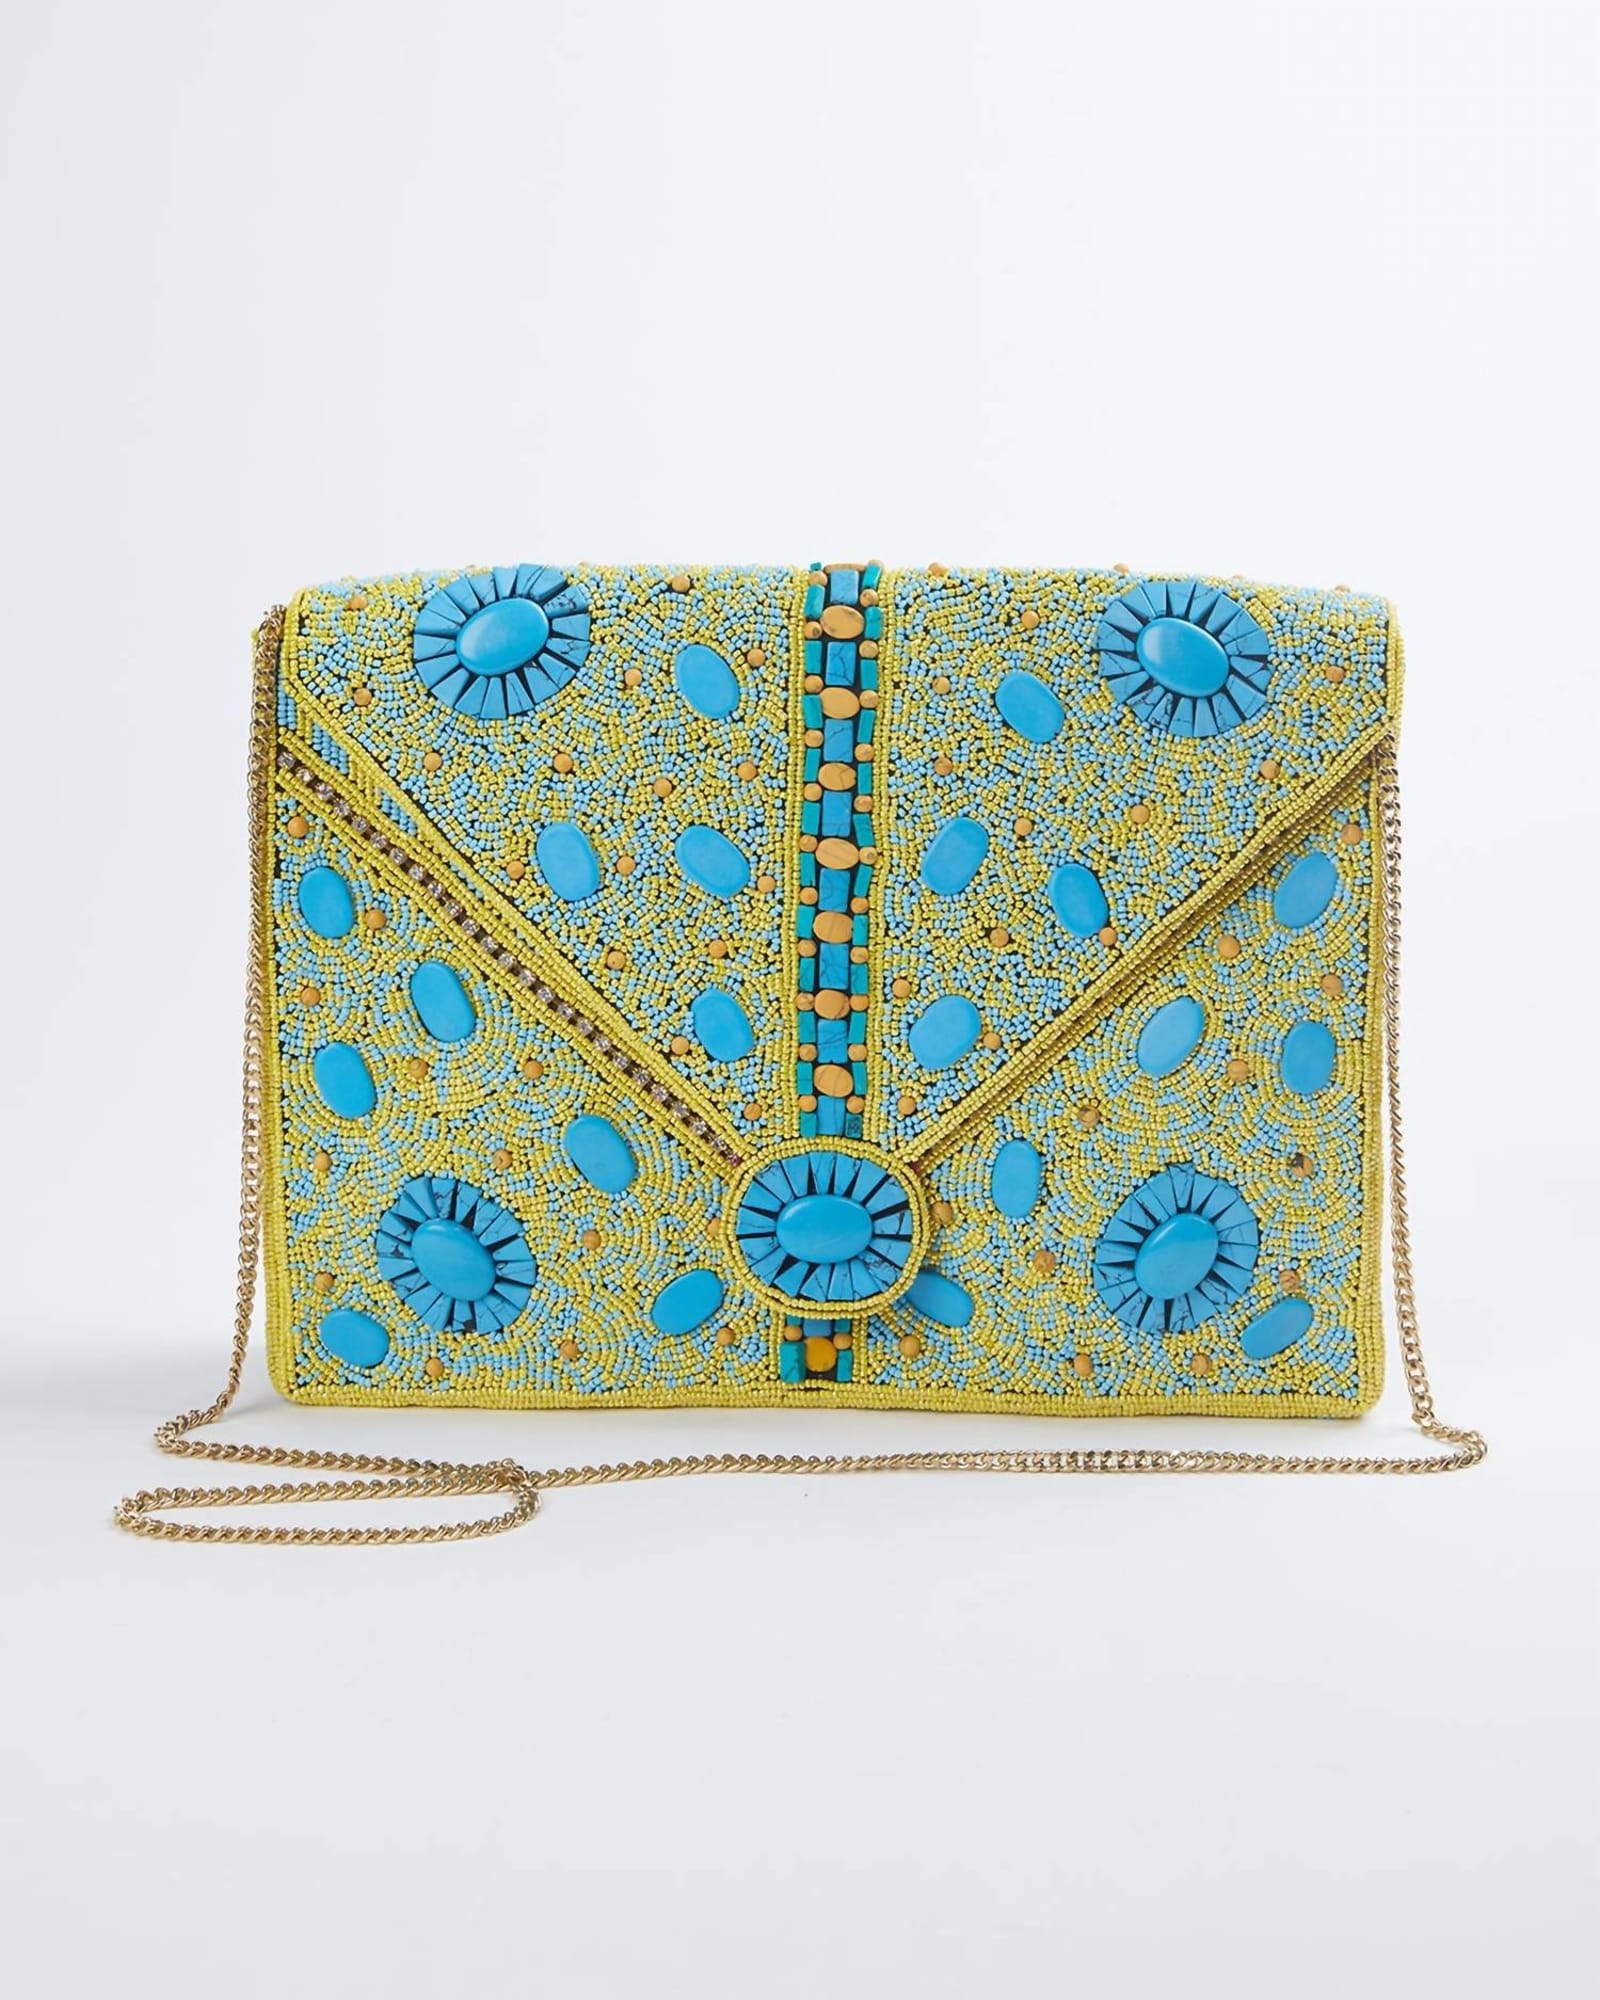 Vasant Handmade Beaded Shoulder Clutch Bag in Turquoise | Turquoise